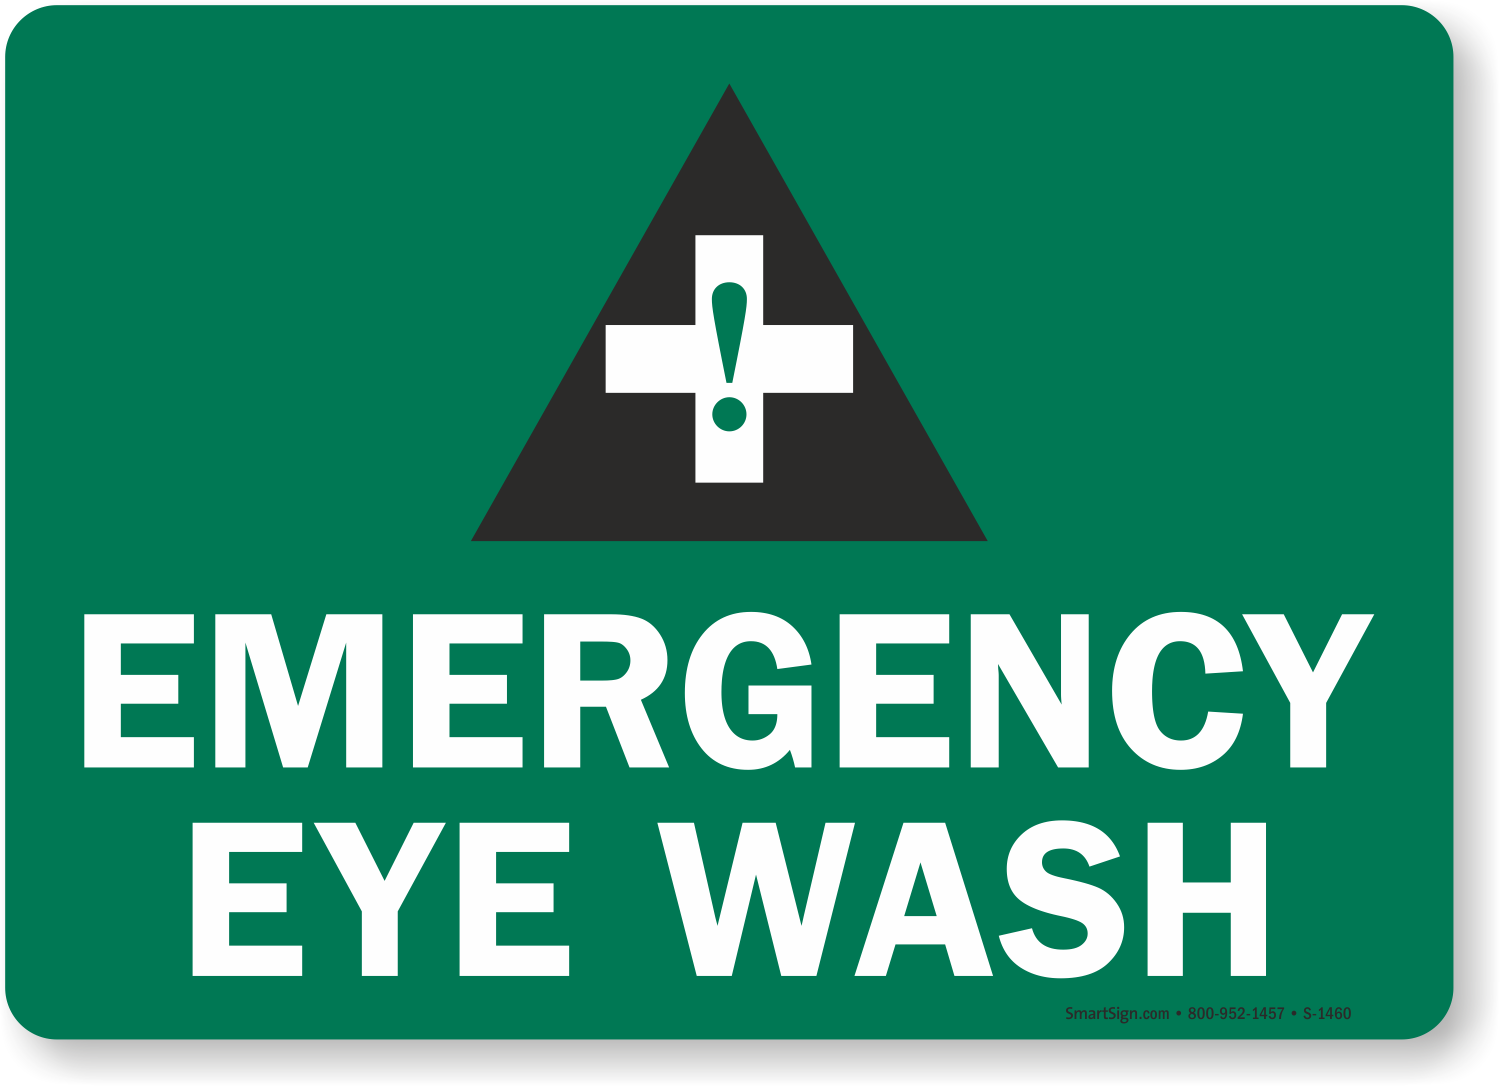 Emergency Eye Wash Signs with Graphic, SKU S1460